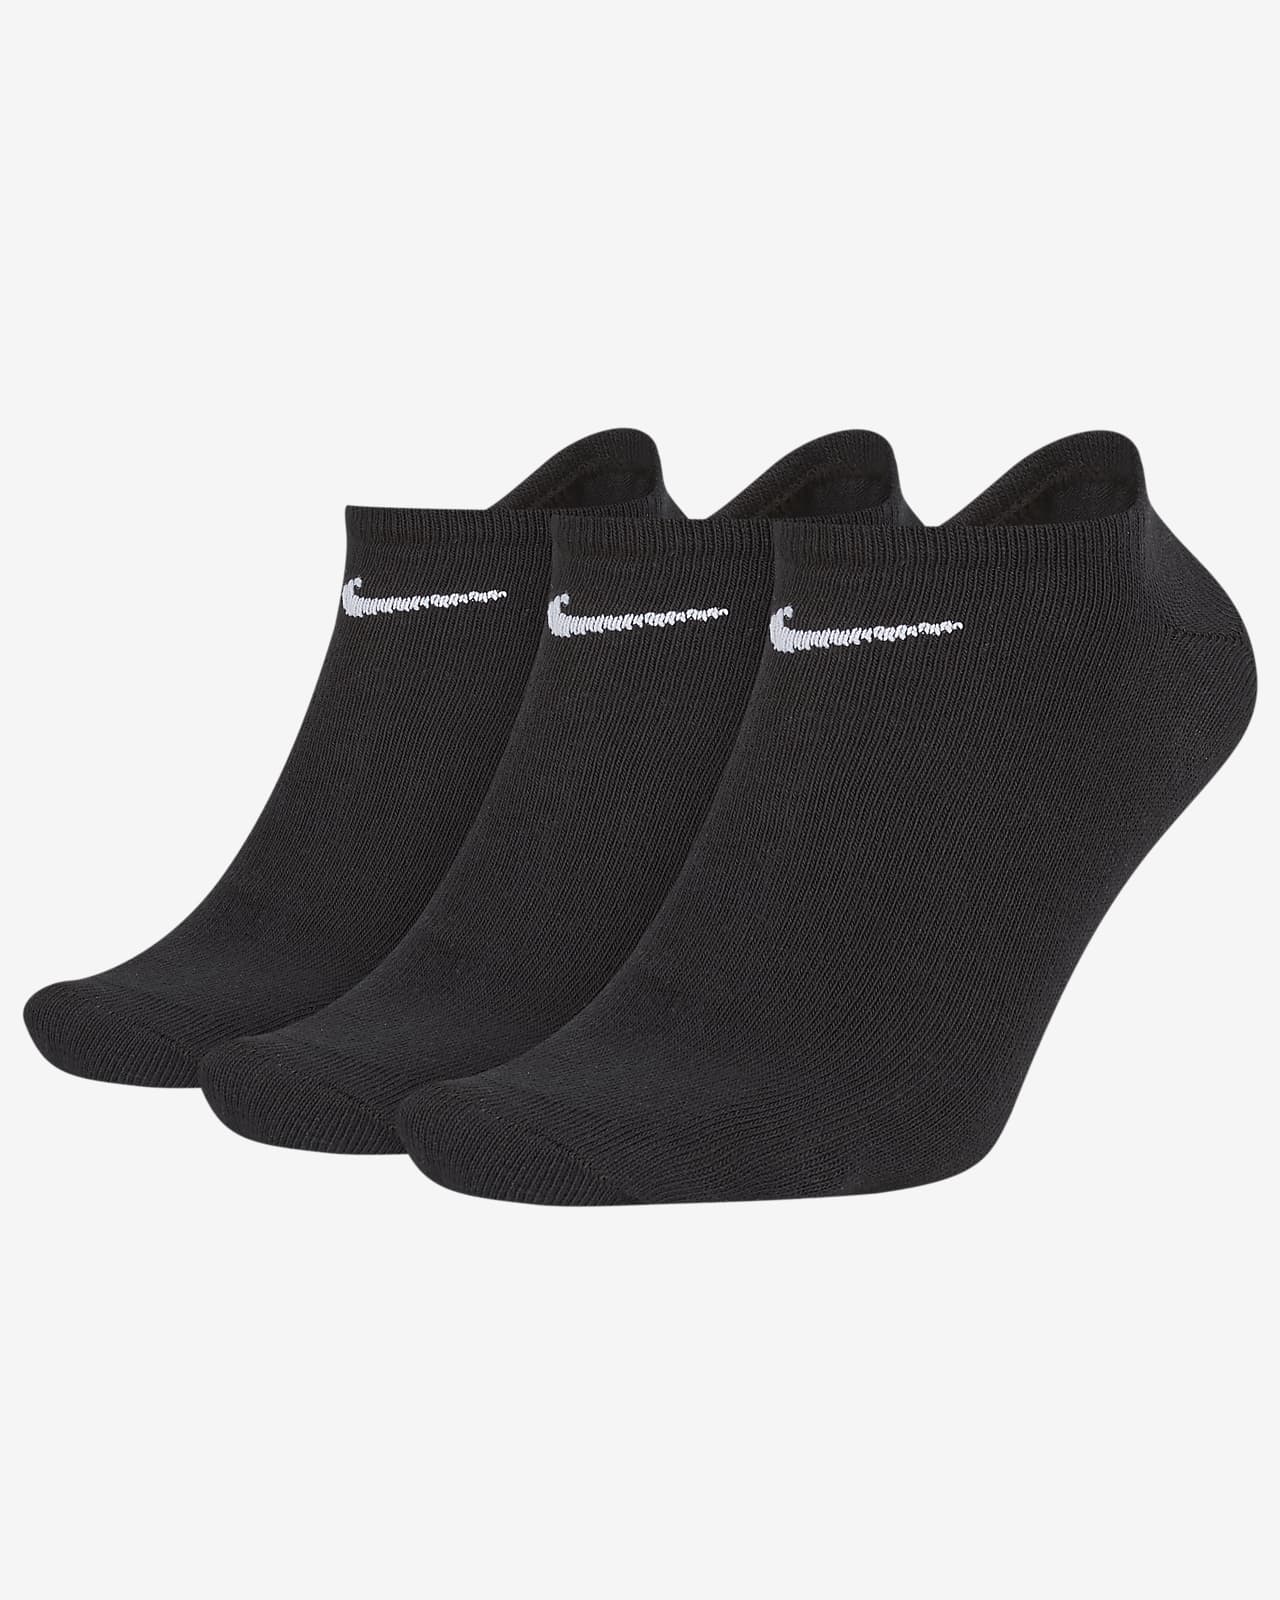 Chaussettes de training invisibles Nike Lightweight (3 paires)